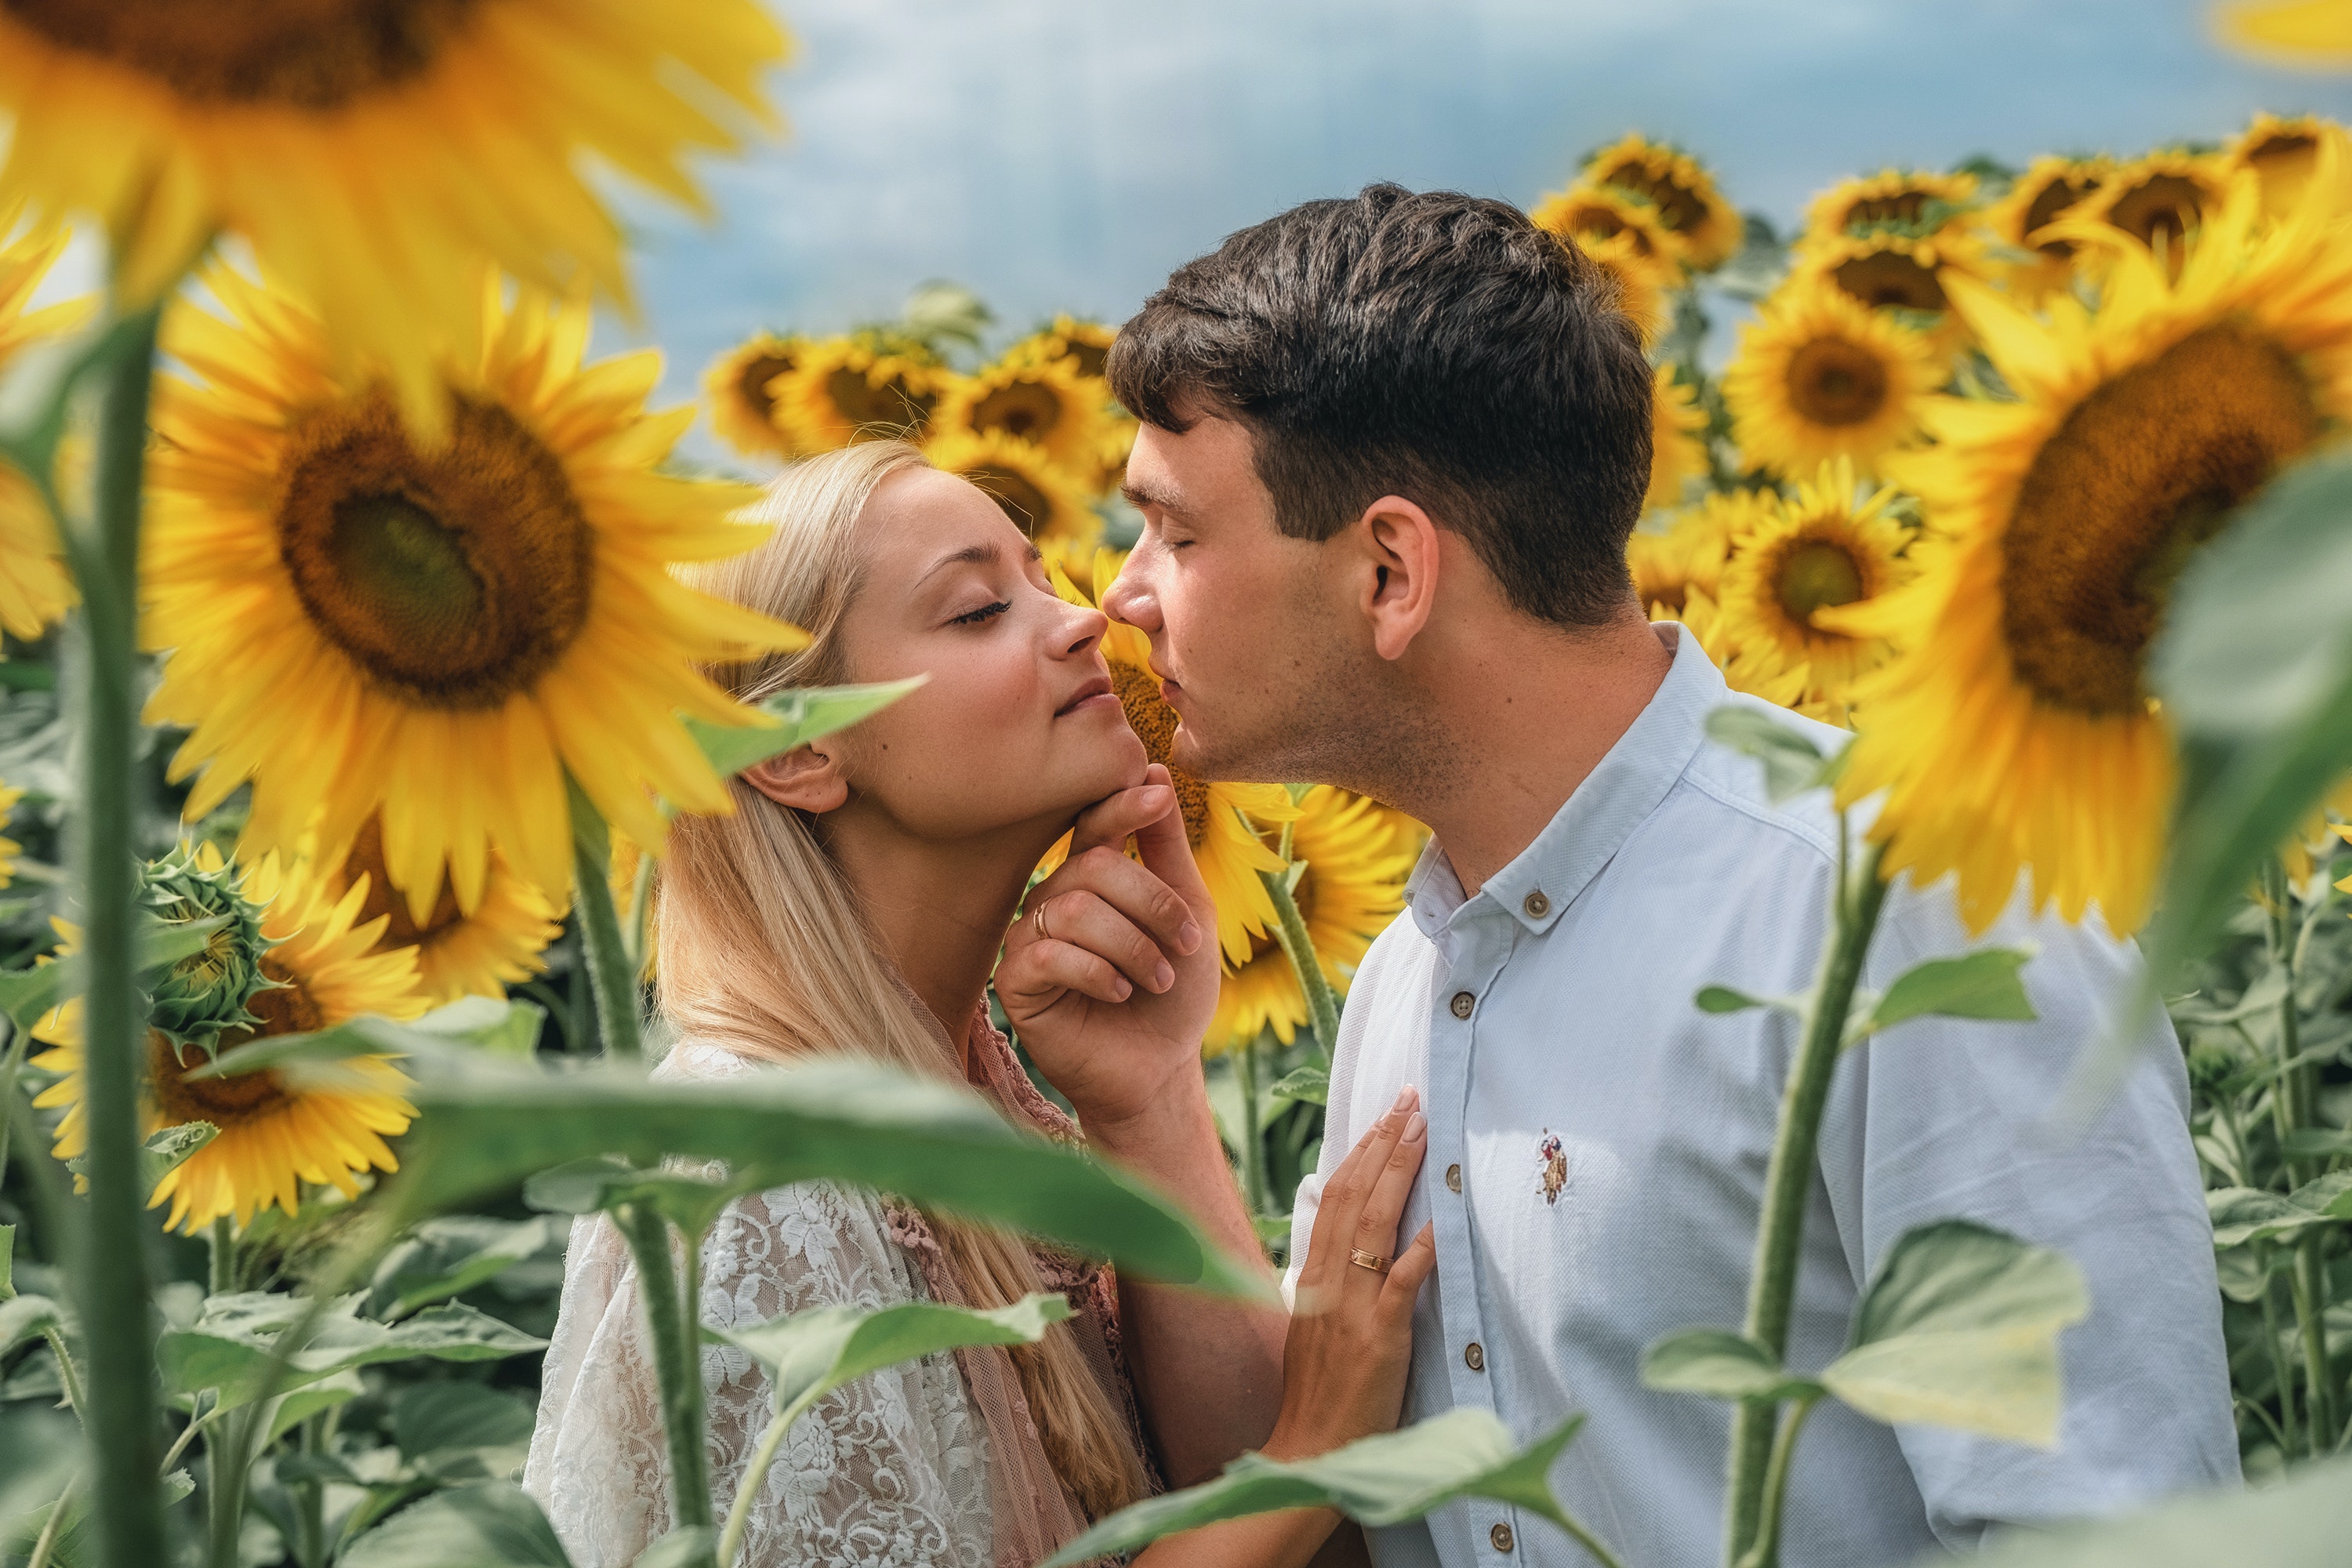 Loving couple embracing in a sunflowers field